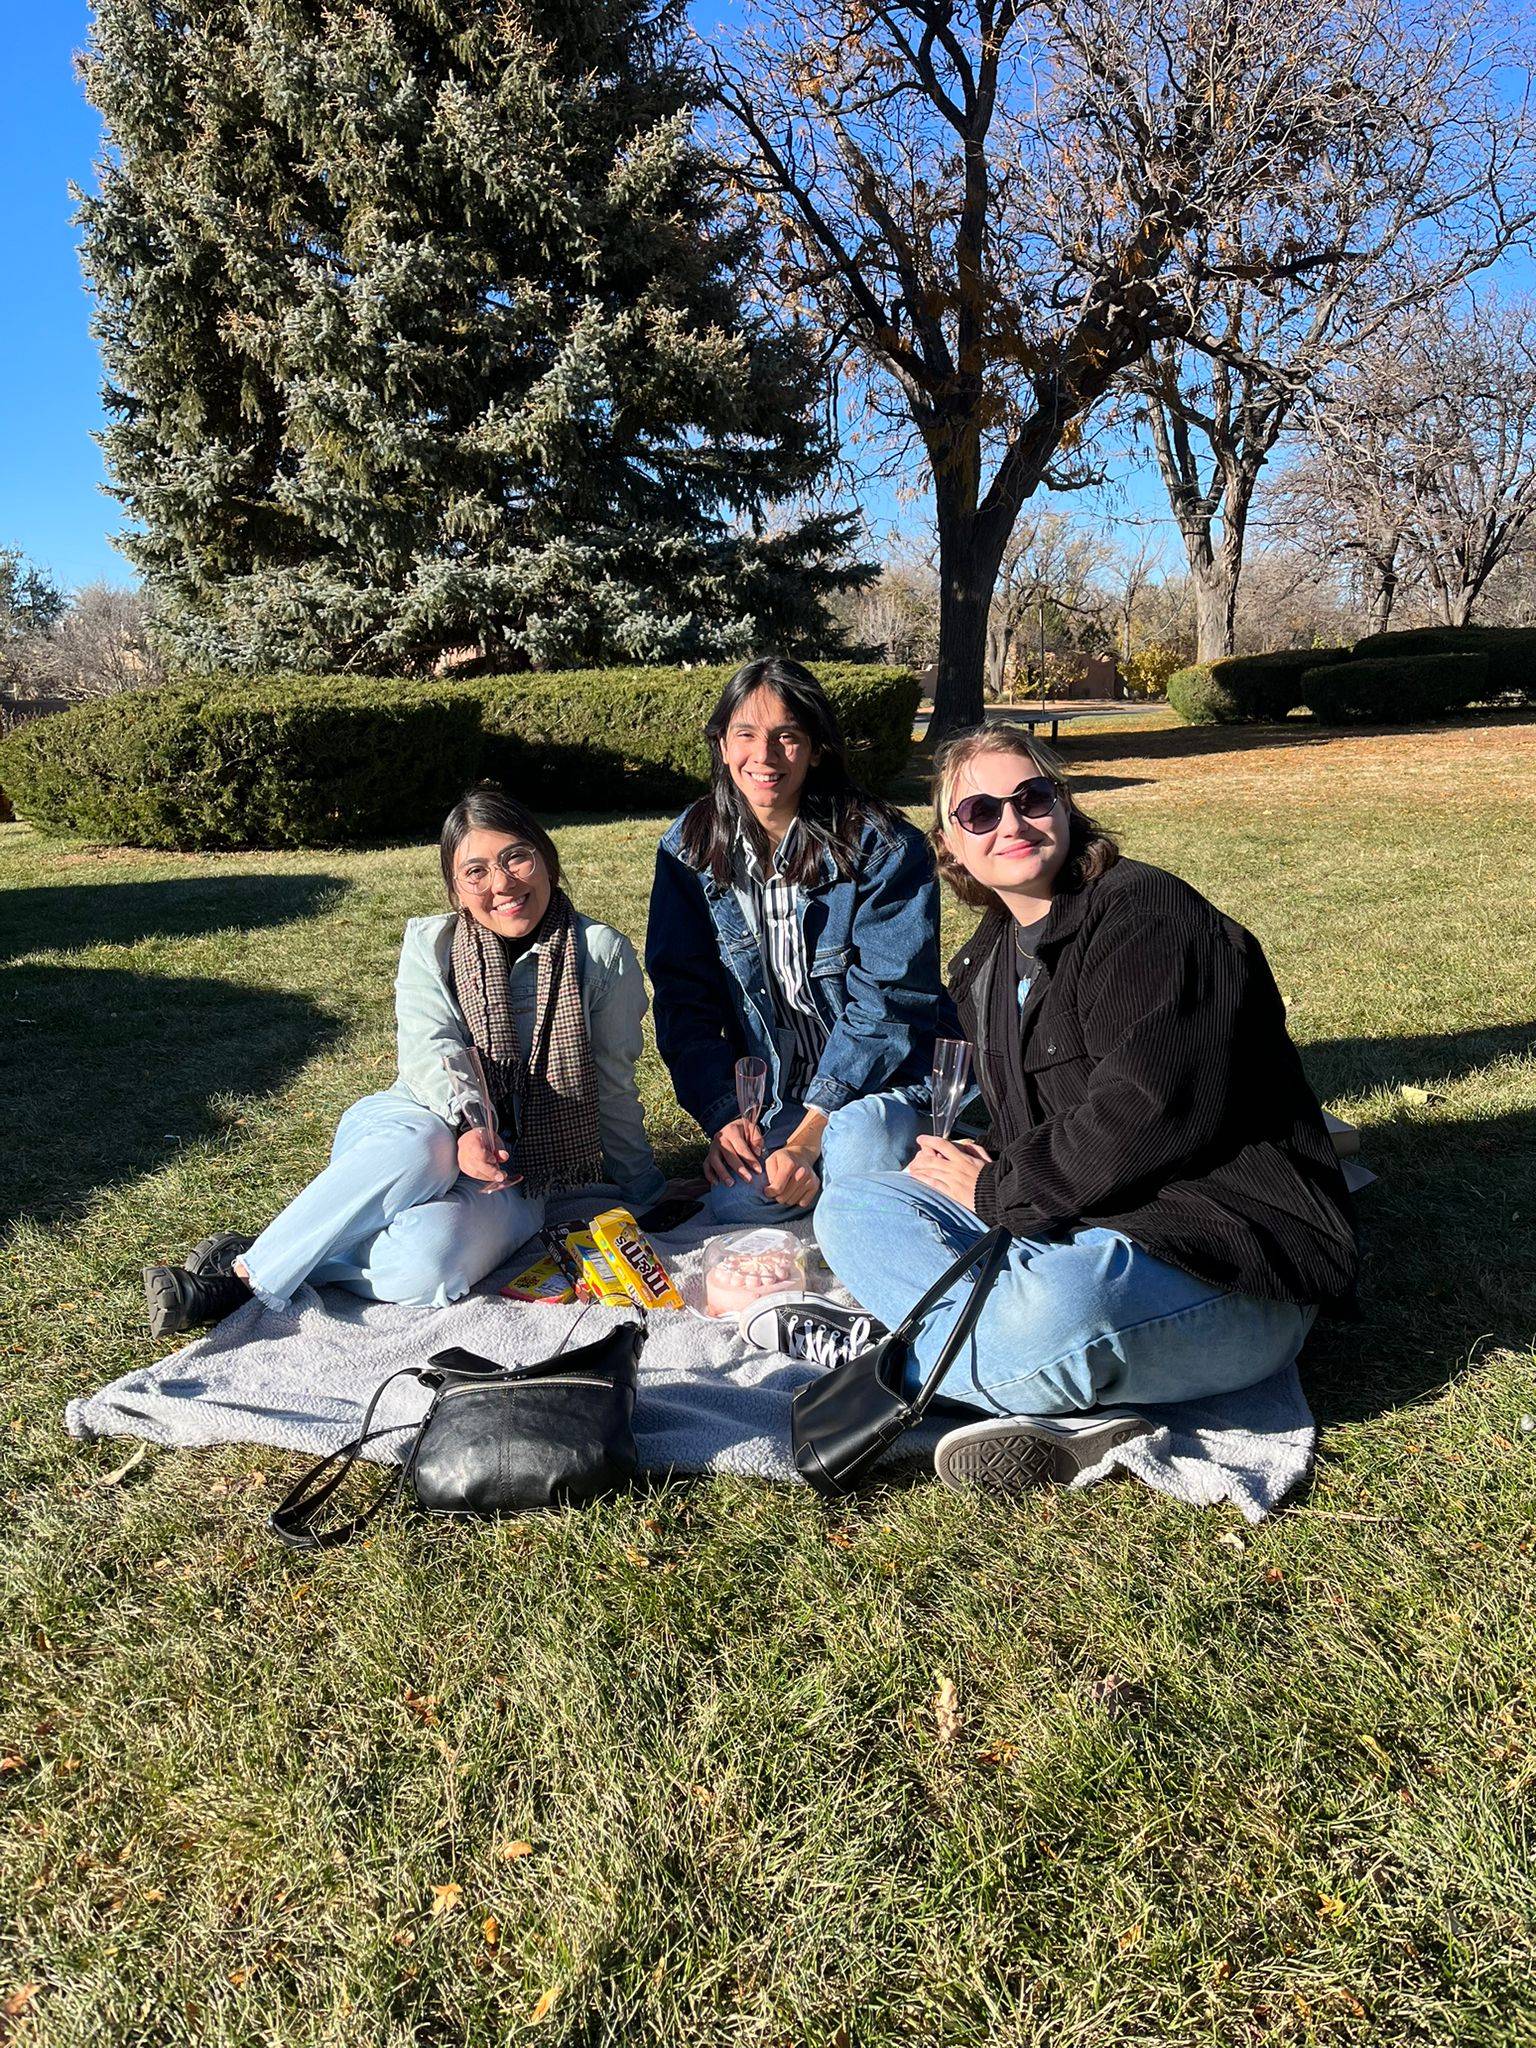 From left to right: Jenny, Gaston, and me,
having a picnic.